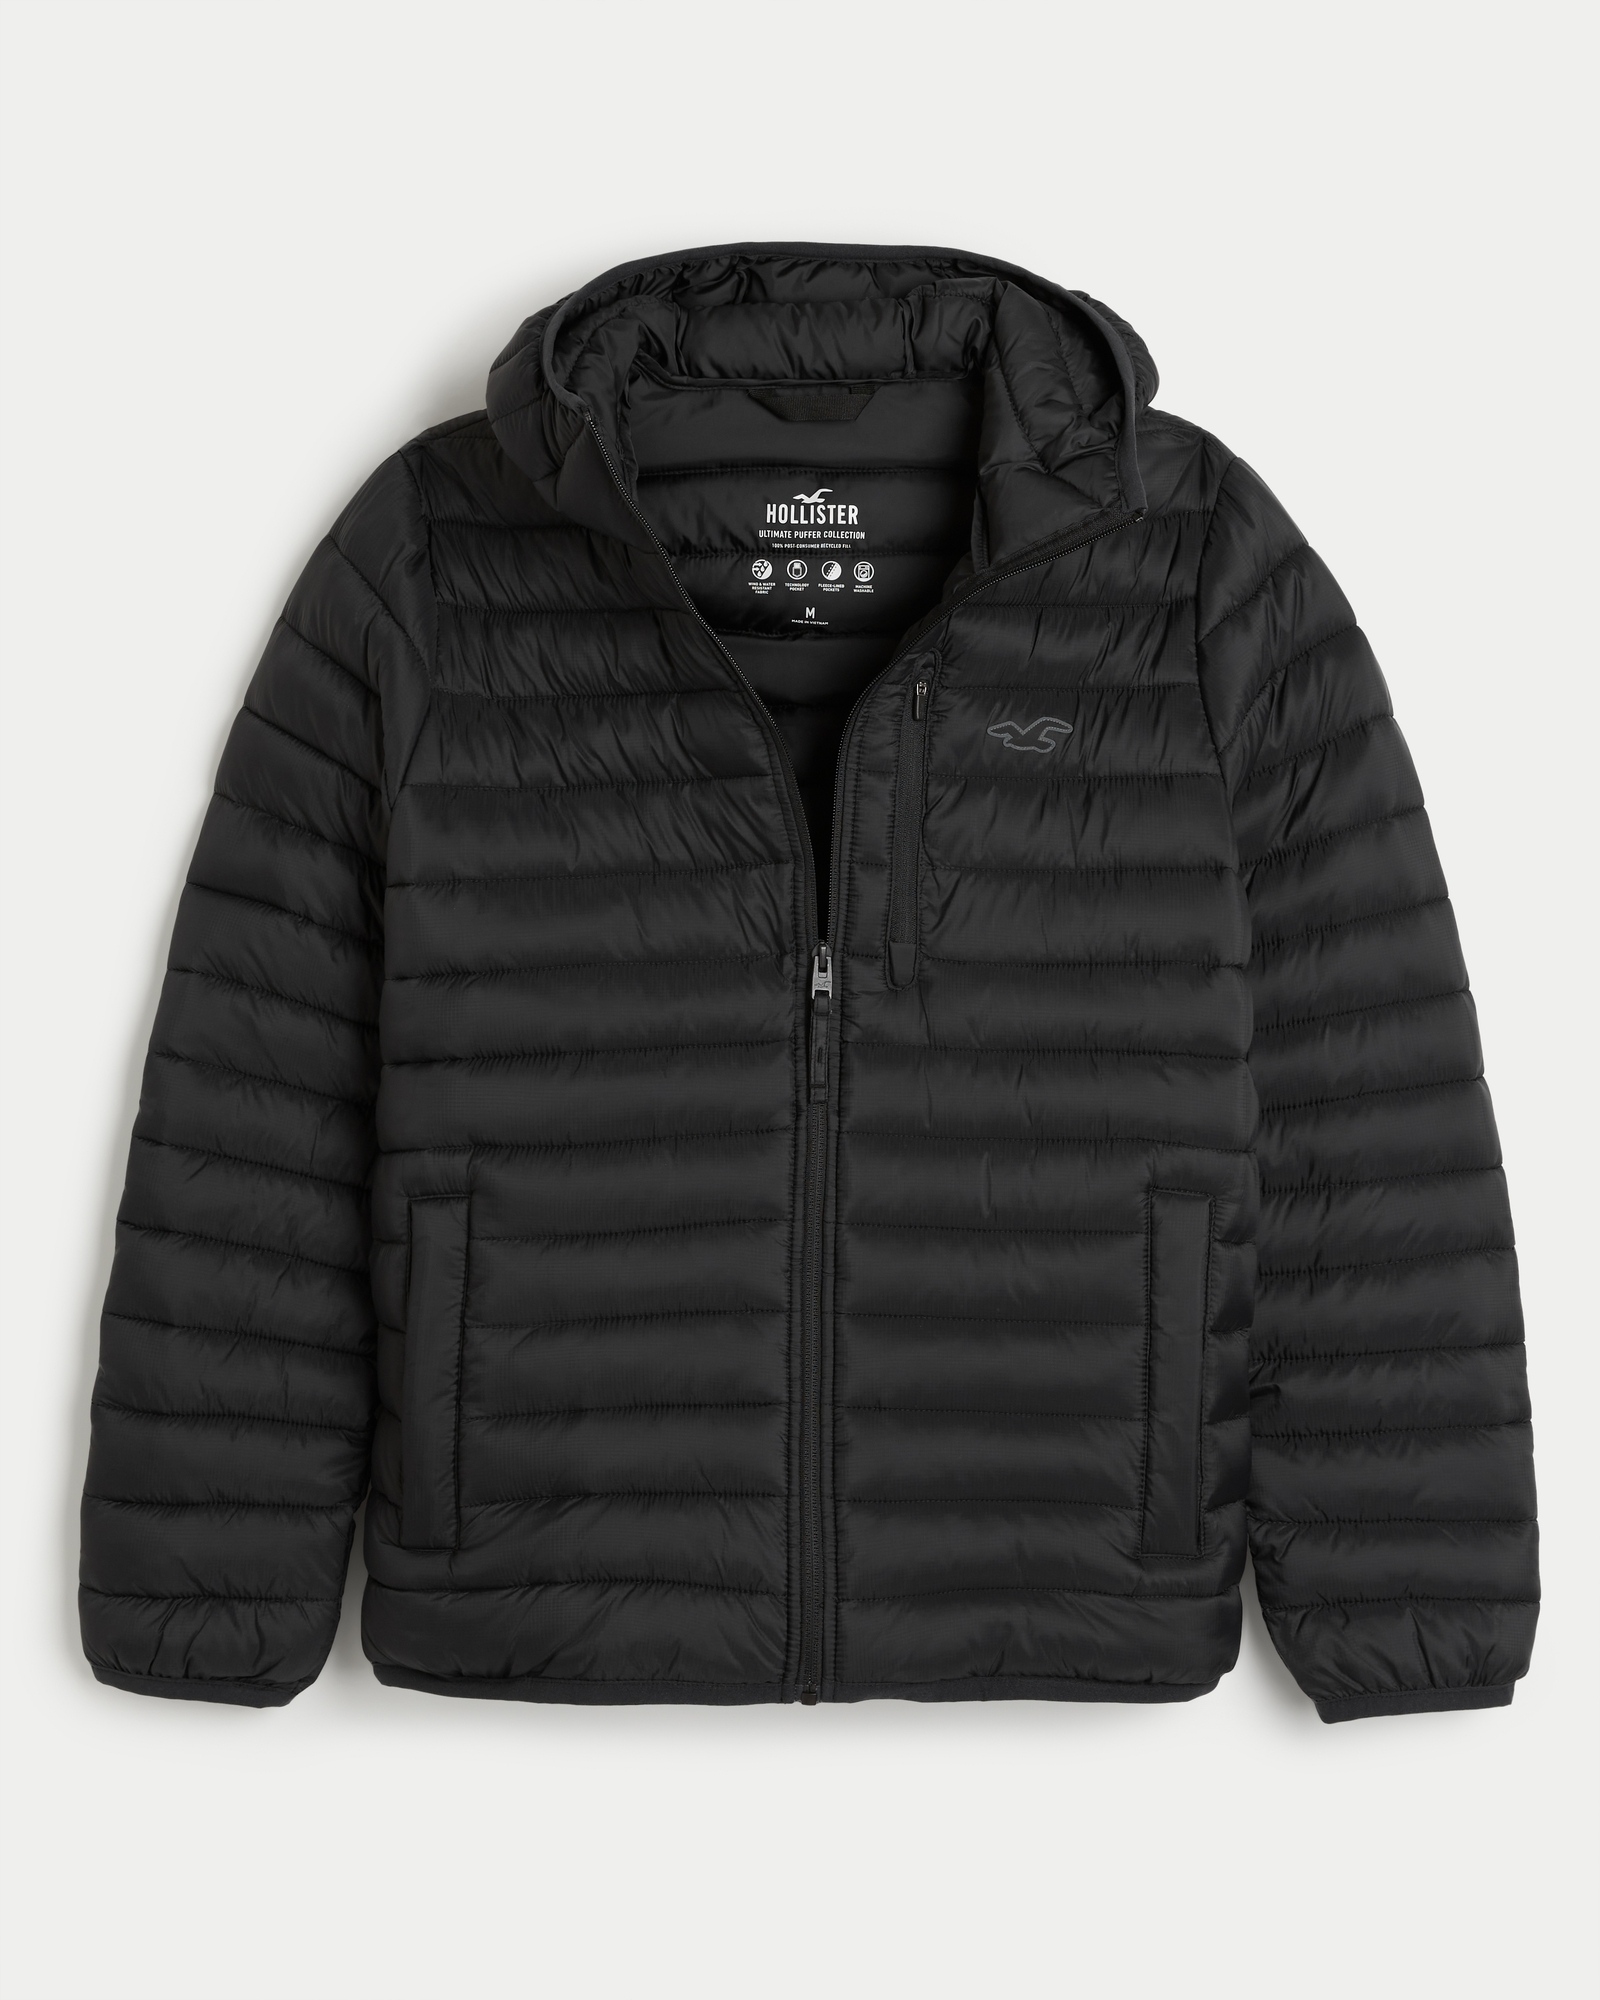 https://img.hollisterco.com/is/image/anf/KIC_332-3035-1767-900_prod1.jpg?policy=product-extra-large